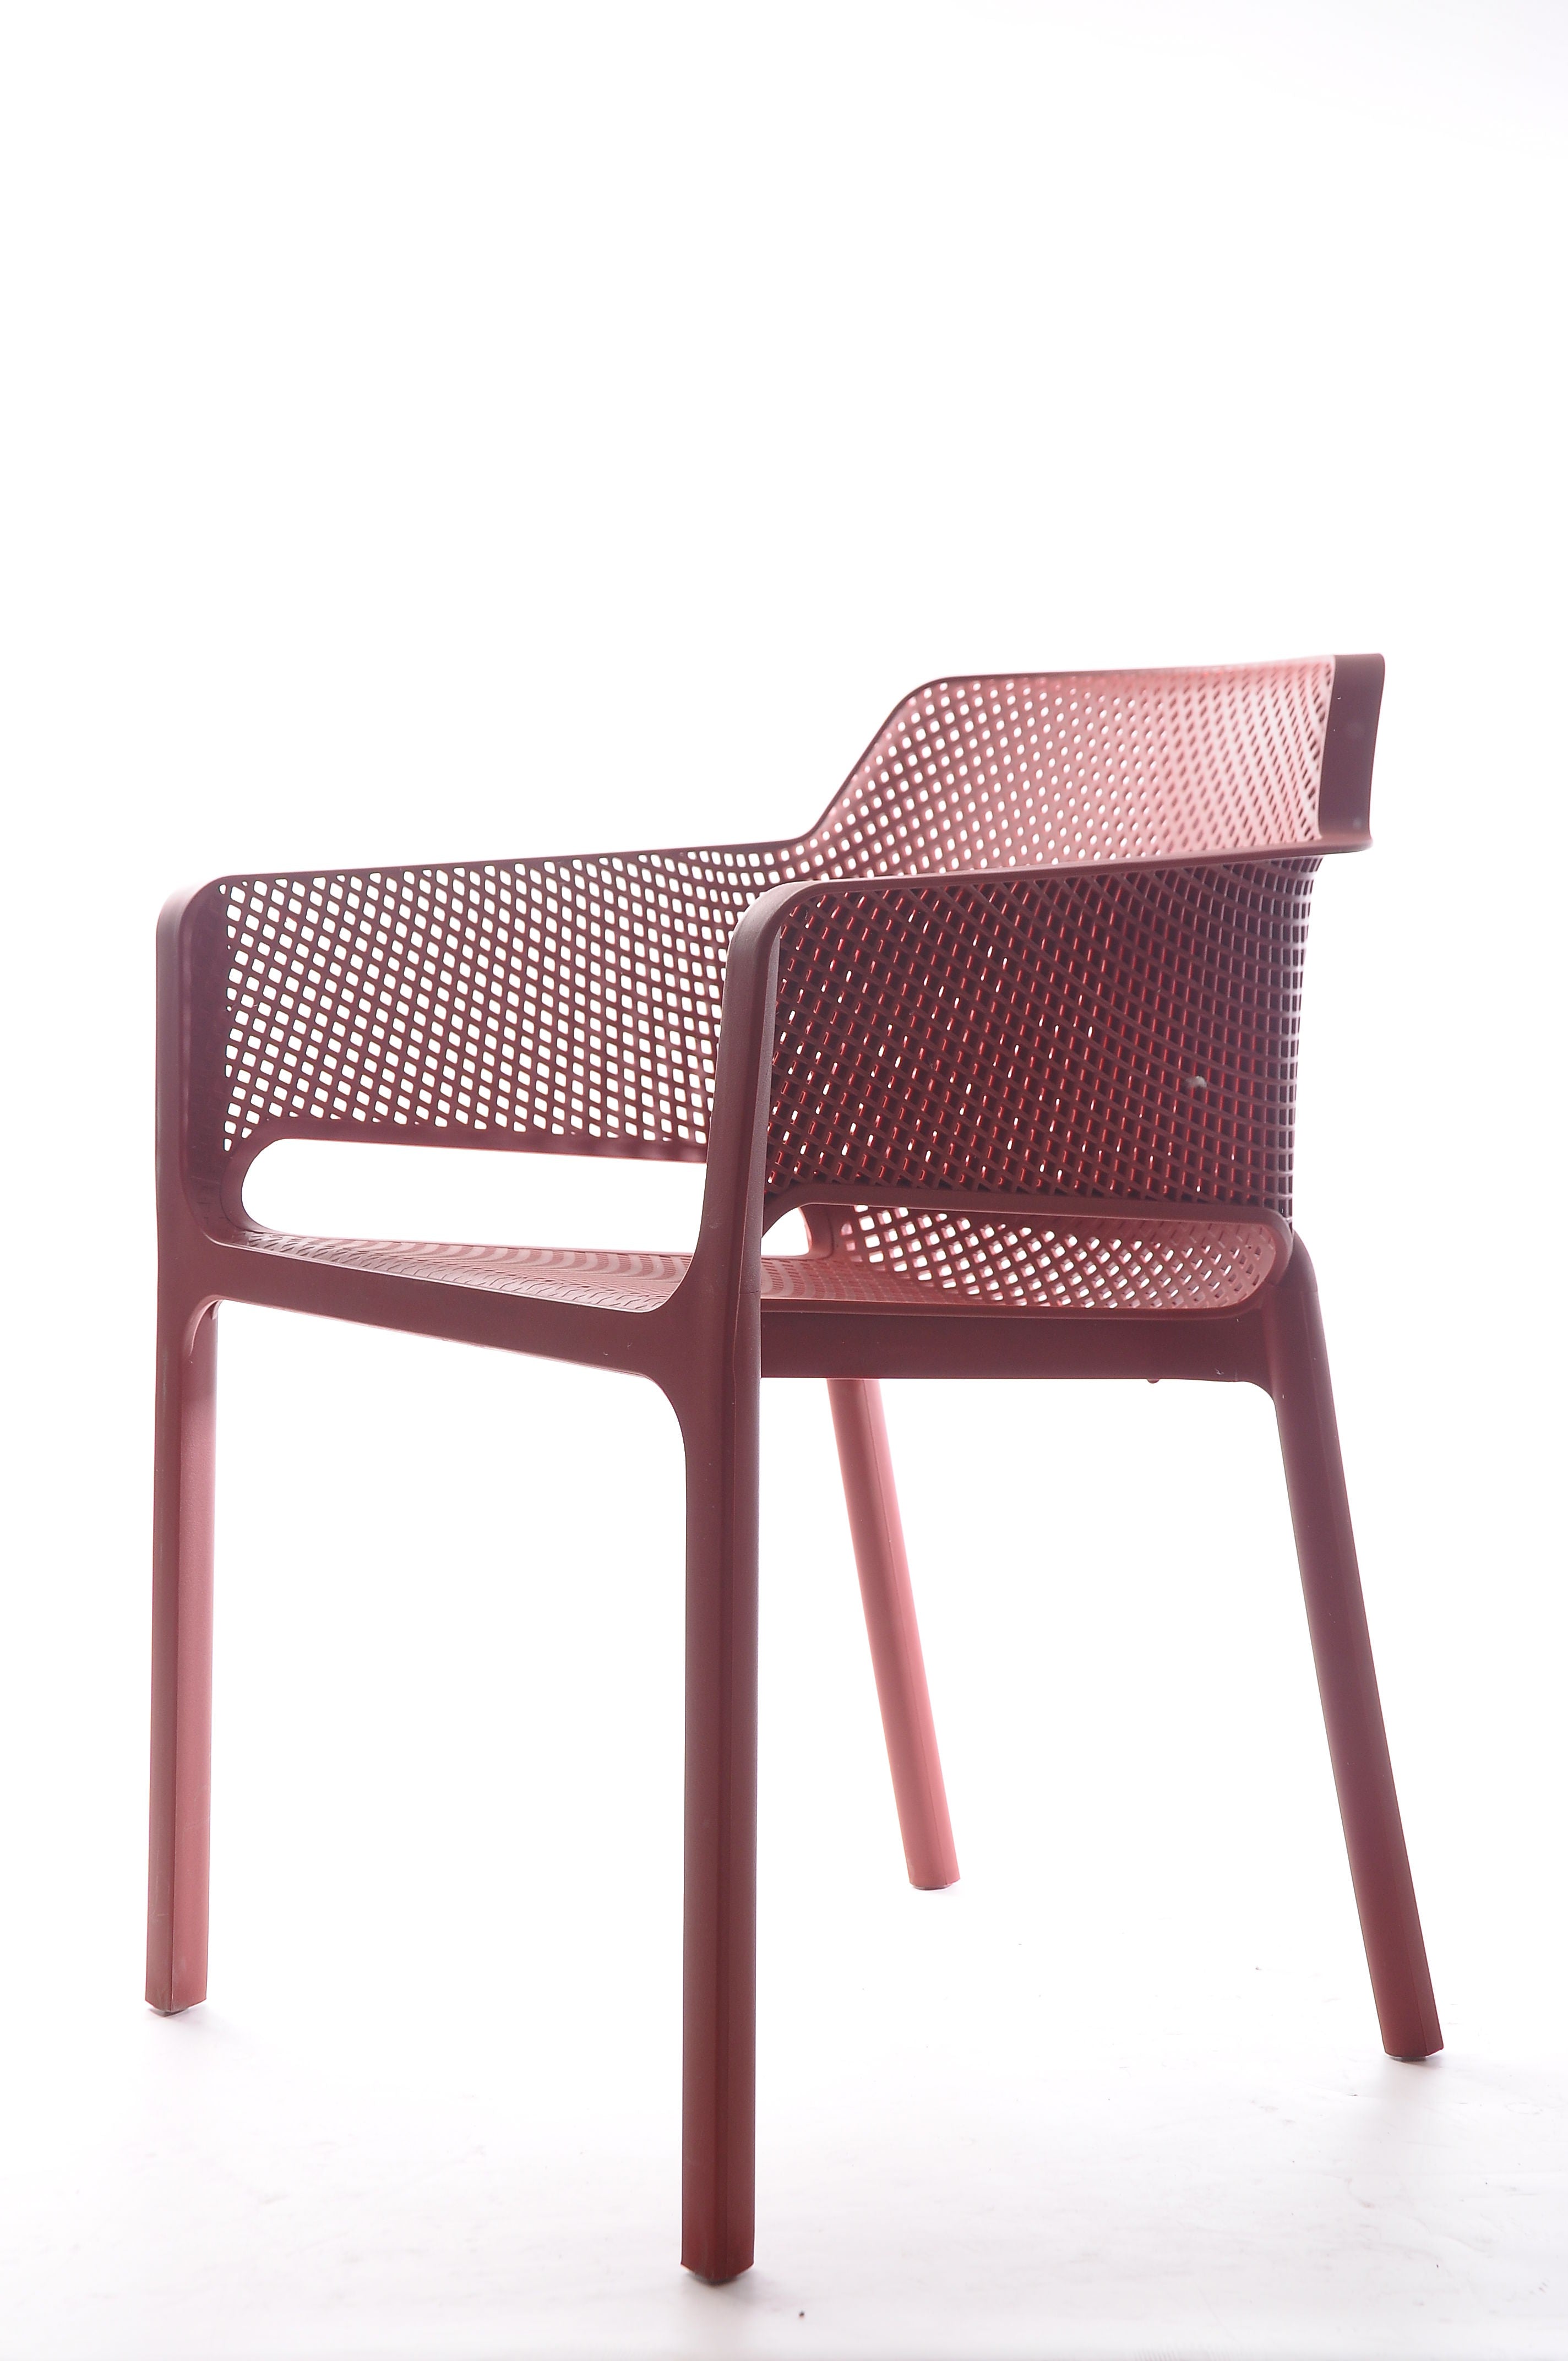 PatioZone Plastic Resin Chair with Hole Detail (PZ-MC23-020R) - Red